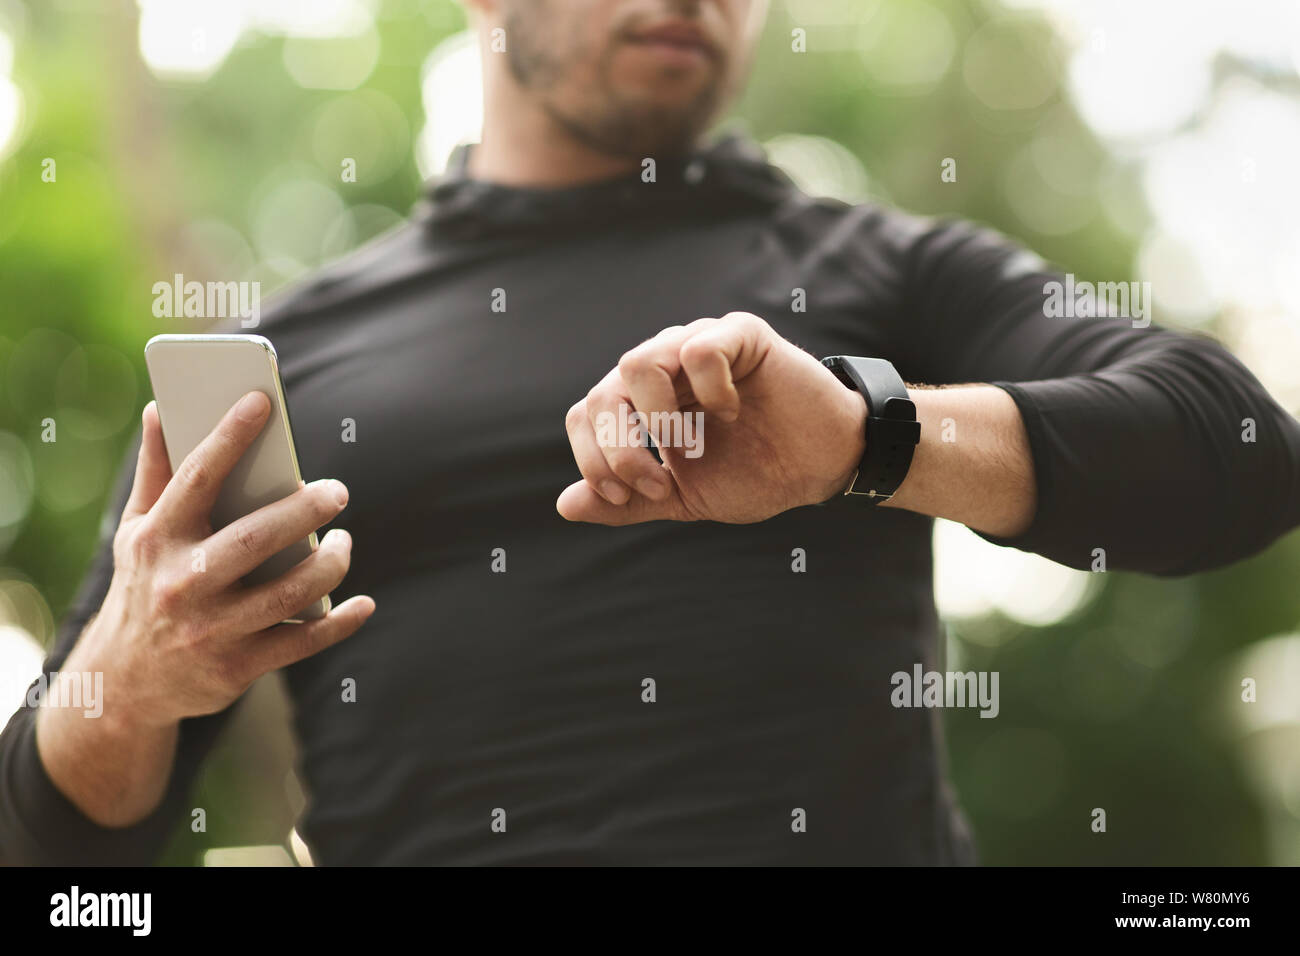 Male athlete using fitness app on his smartwatch Stock Photo